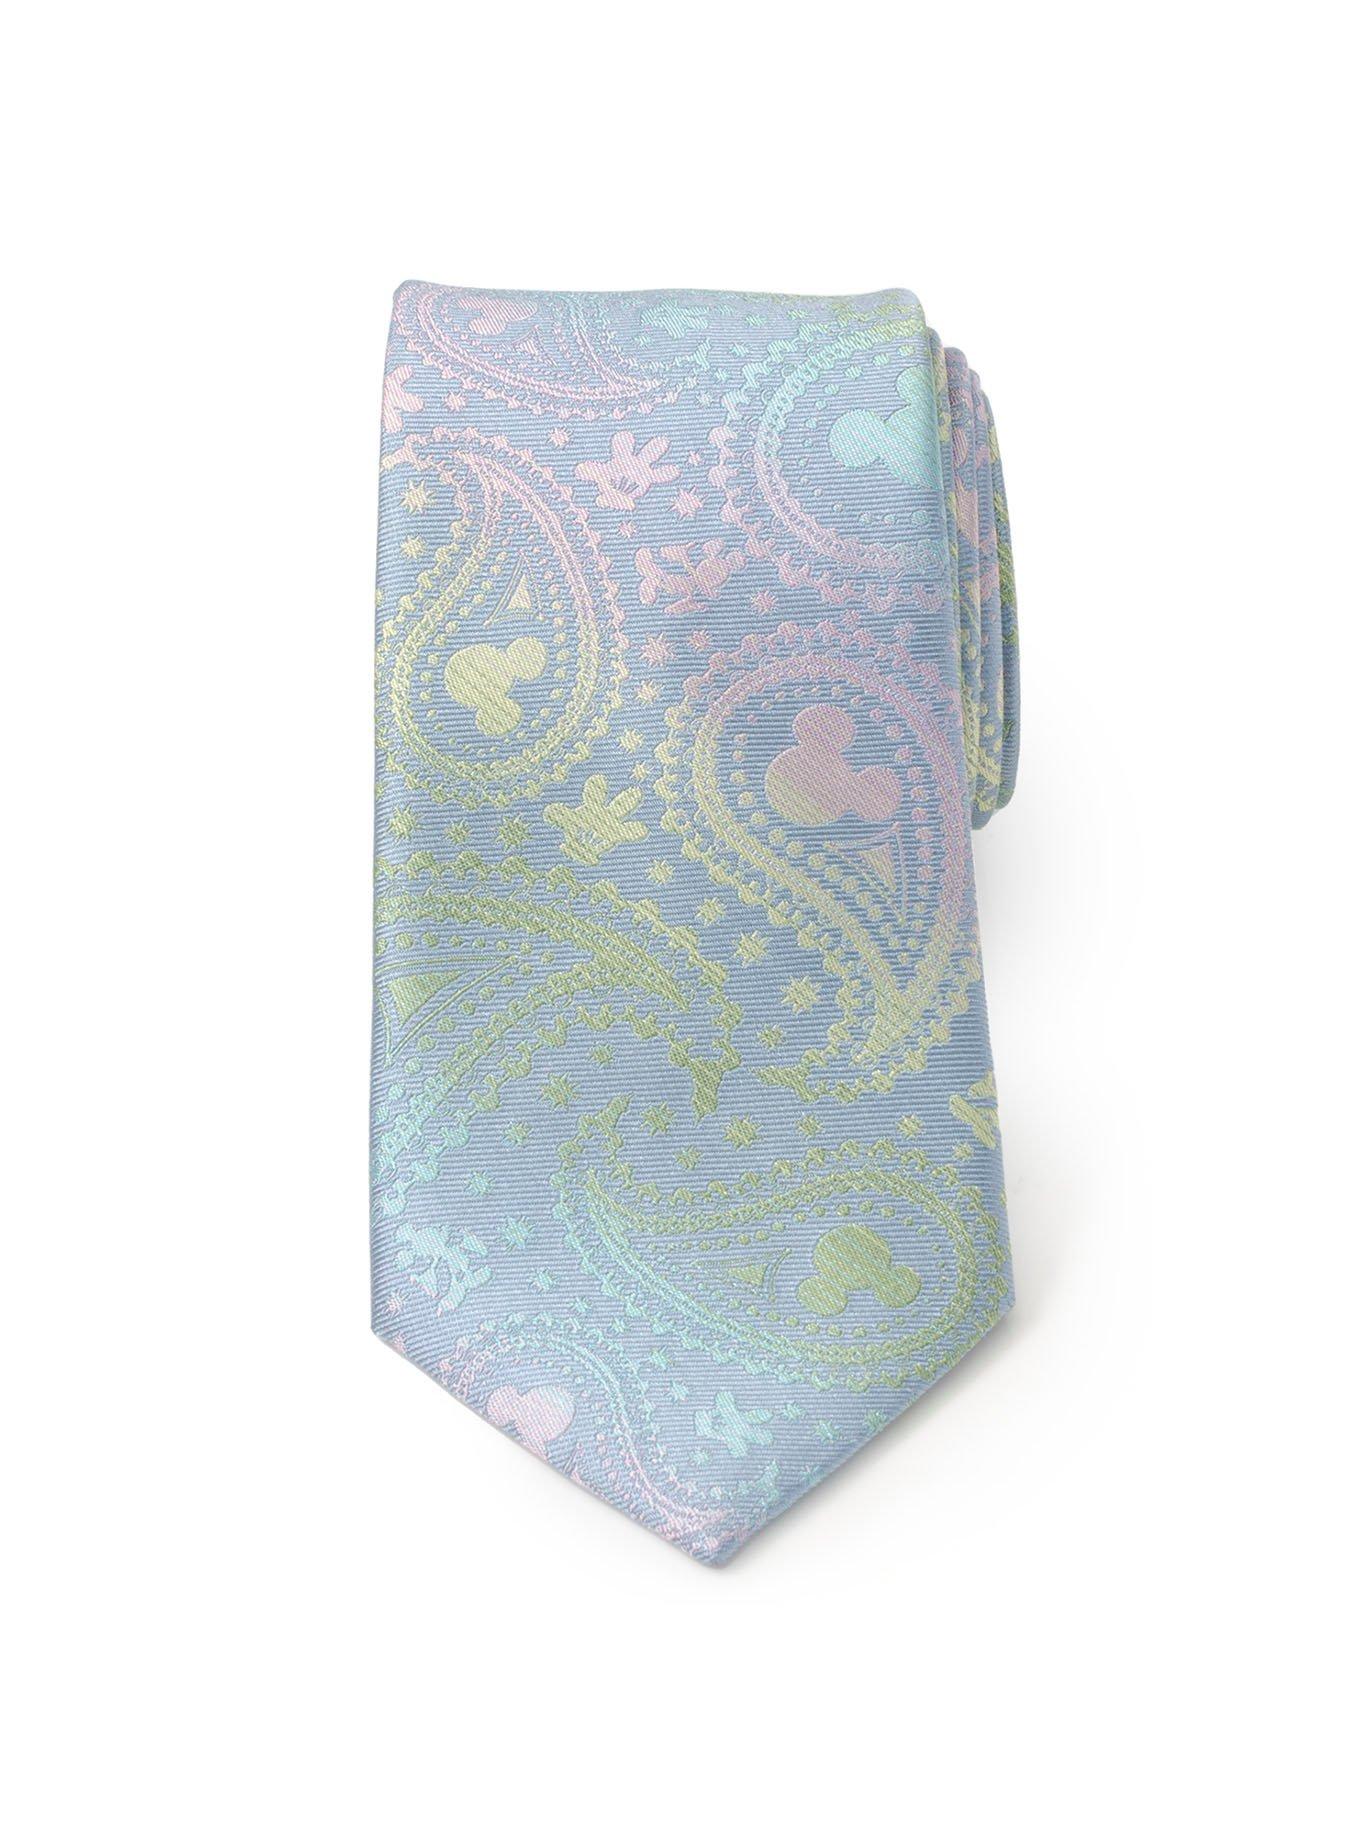 Disney Mickey Mouse Silhouette Iridescent Soft Tie